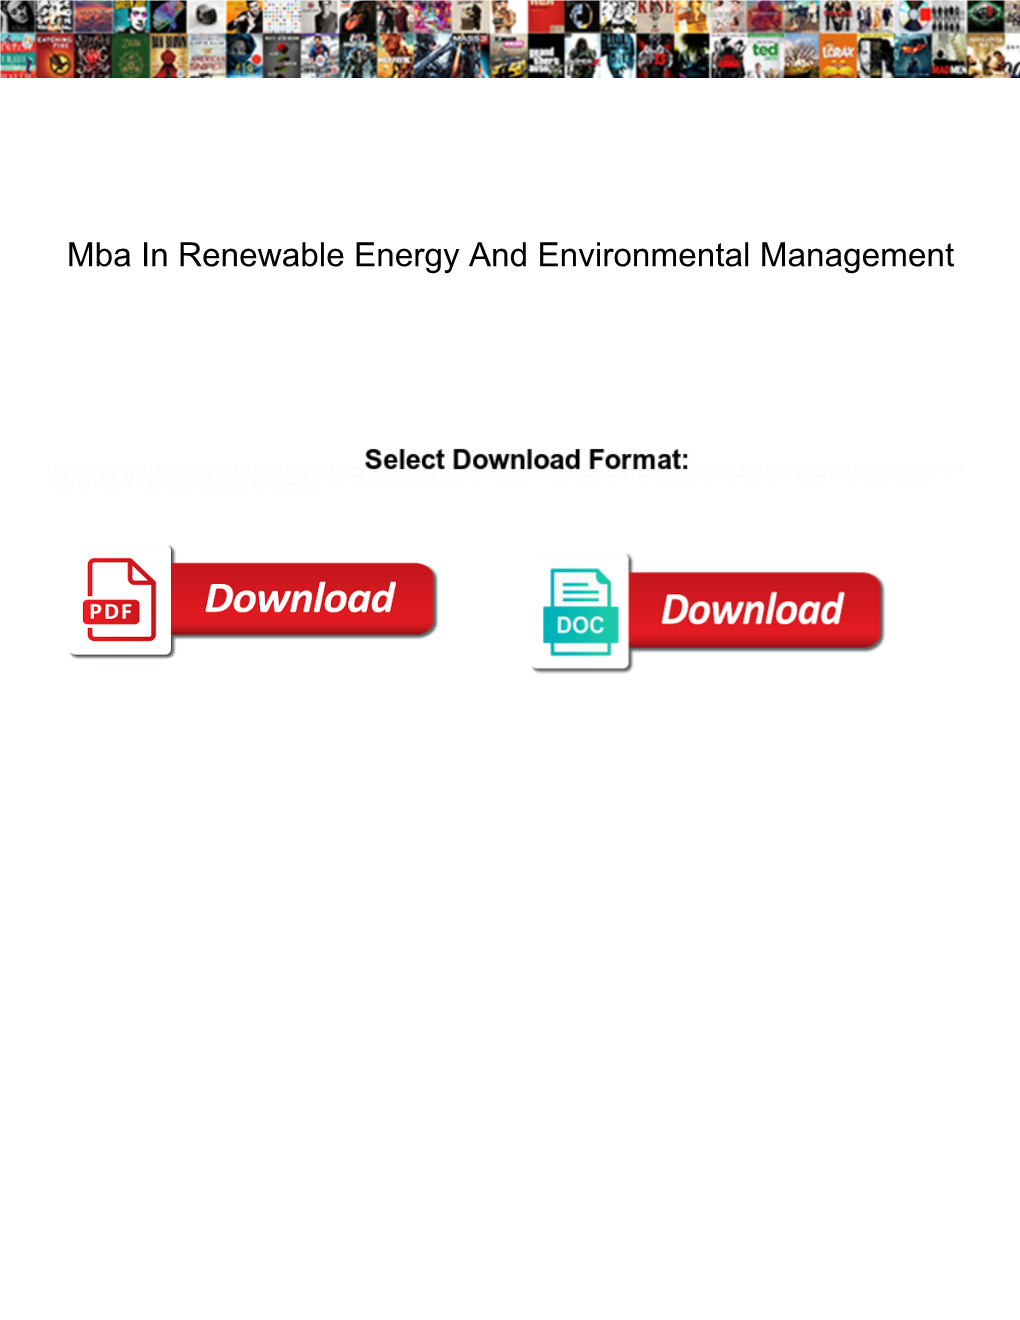 Mba in Renewable Energy and Environmental Management